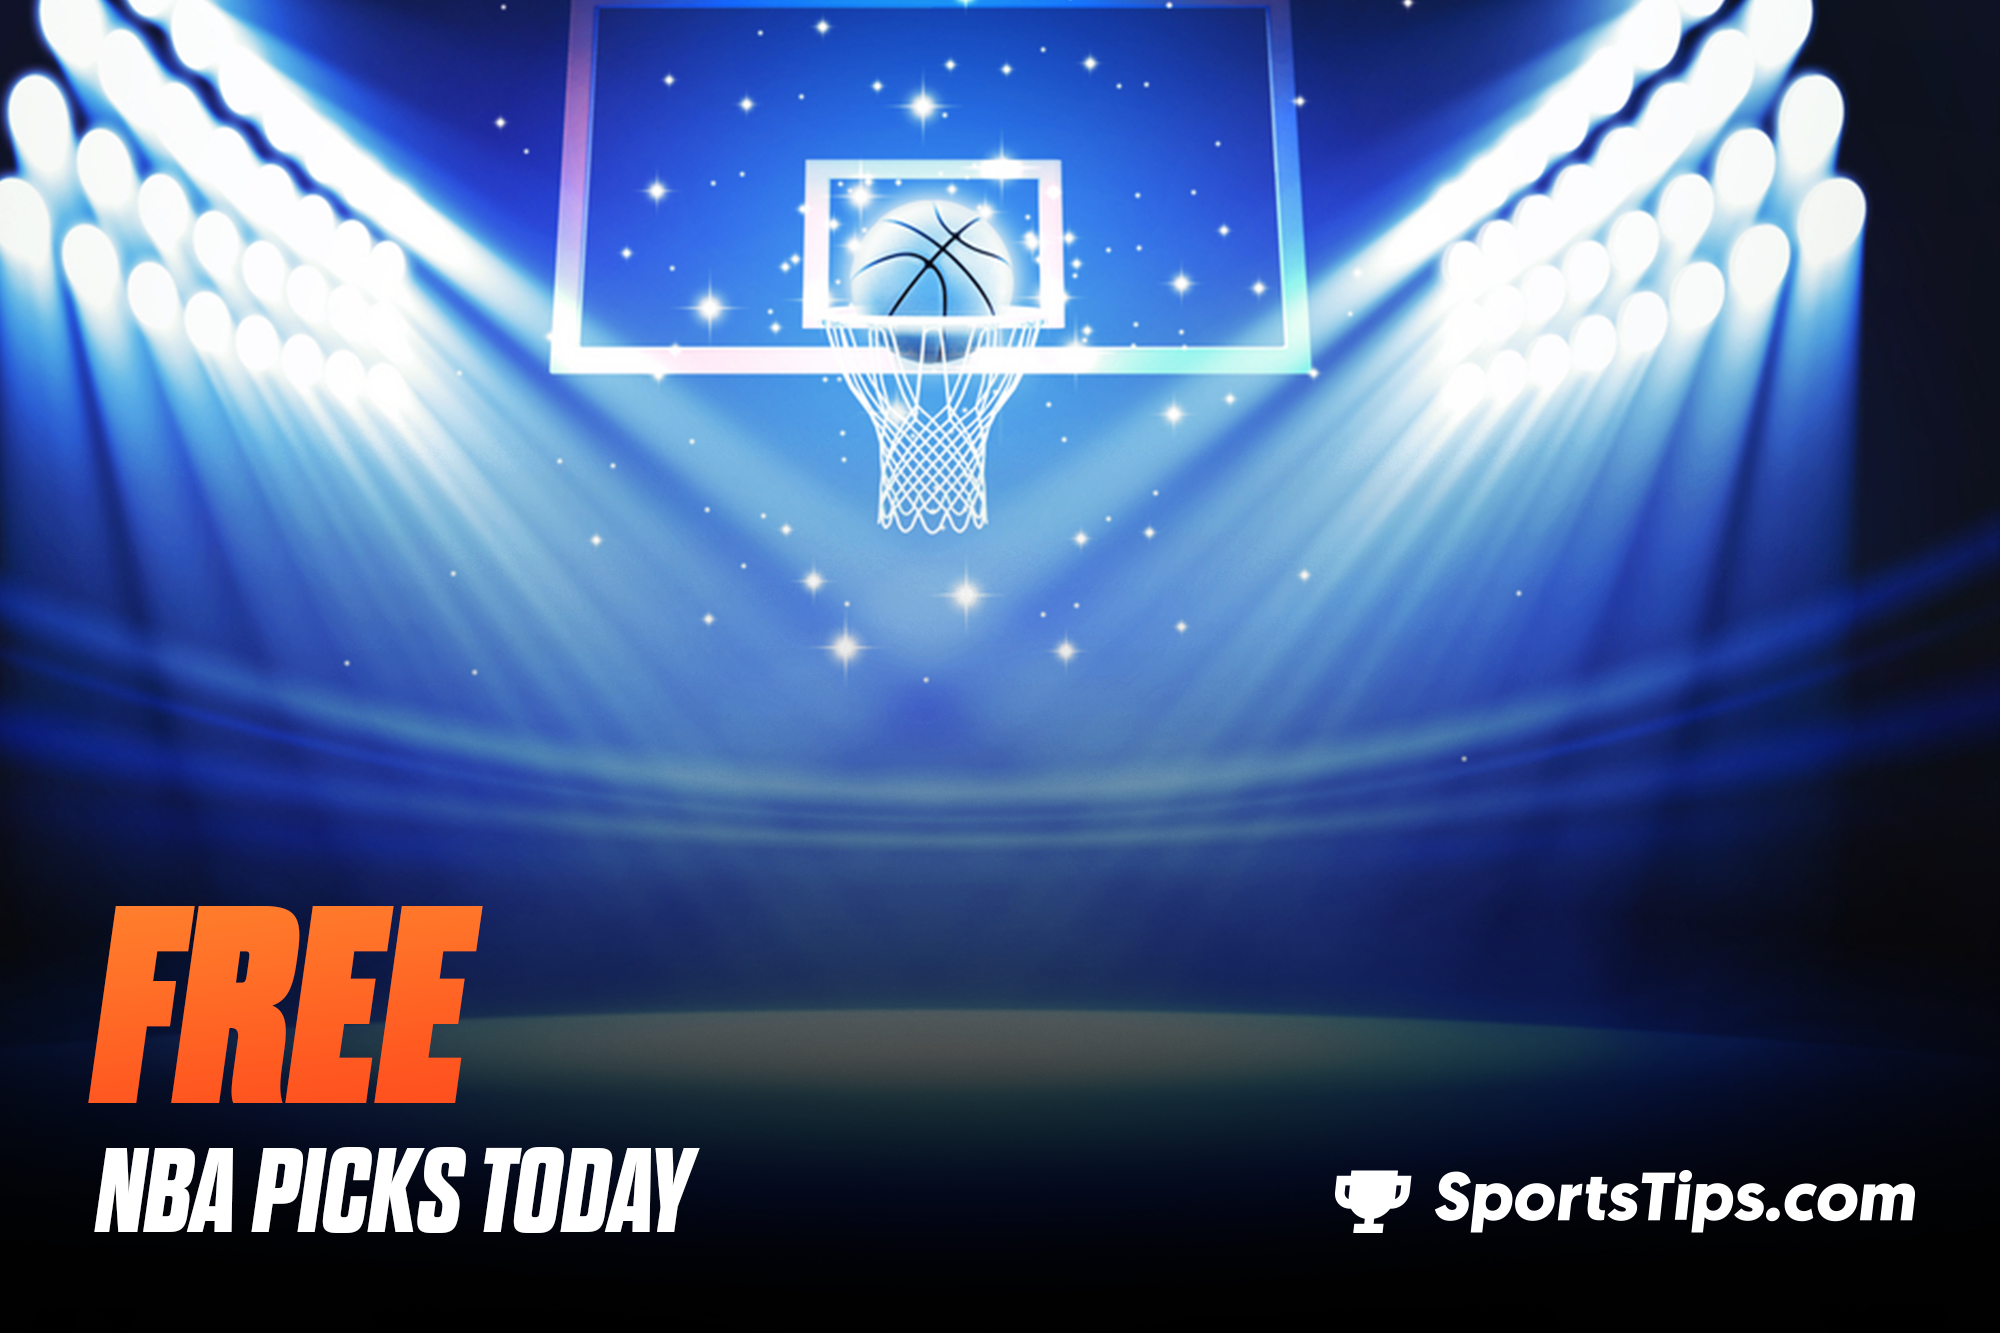 Free NBA Picks and Parlays For Saturday, October 29th, 2022